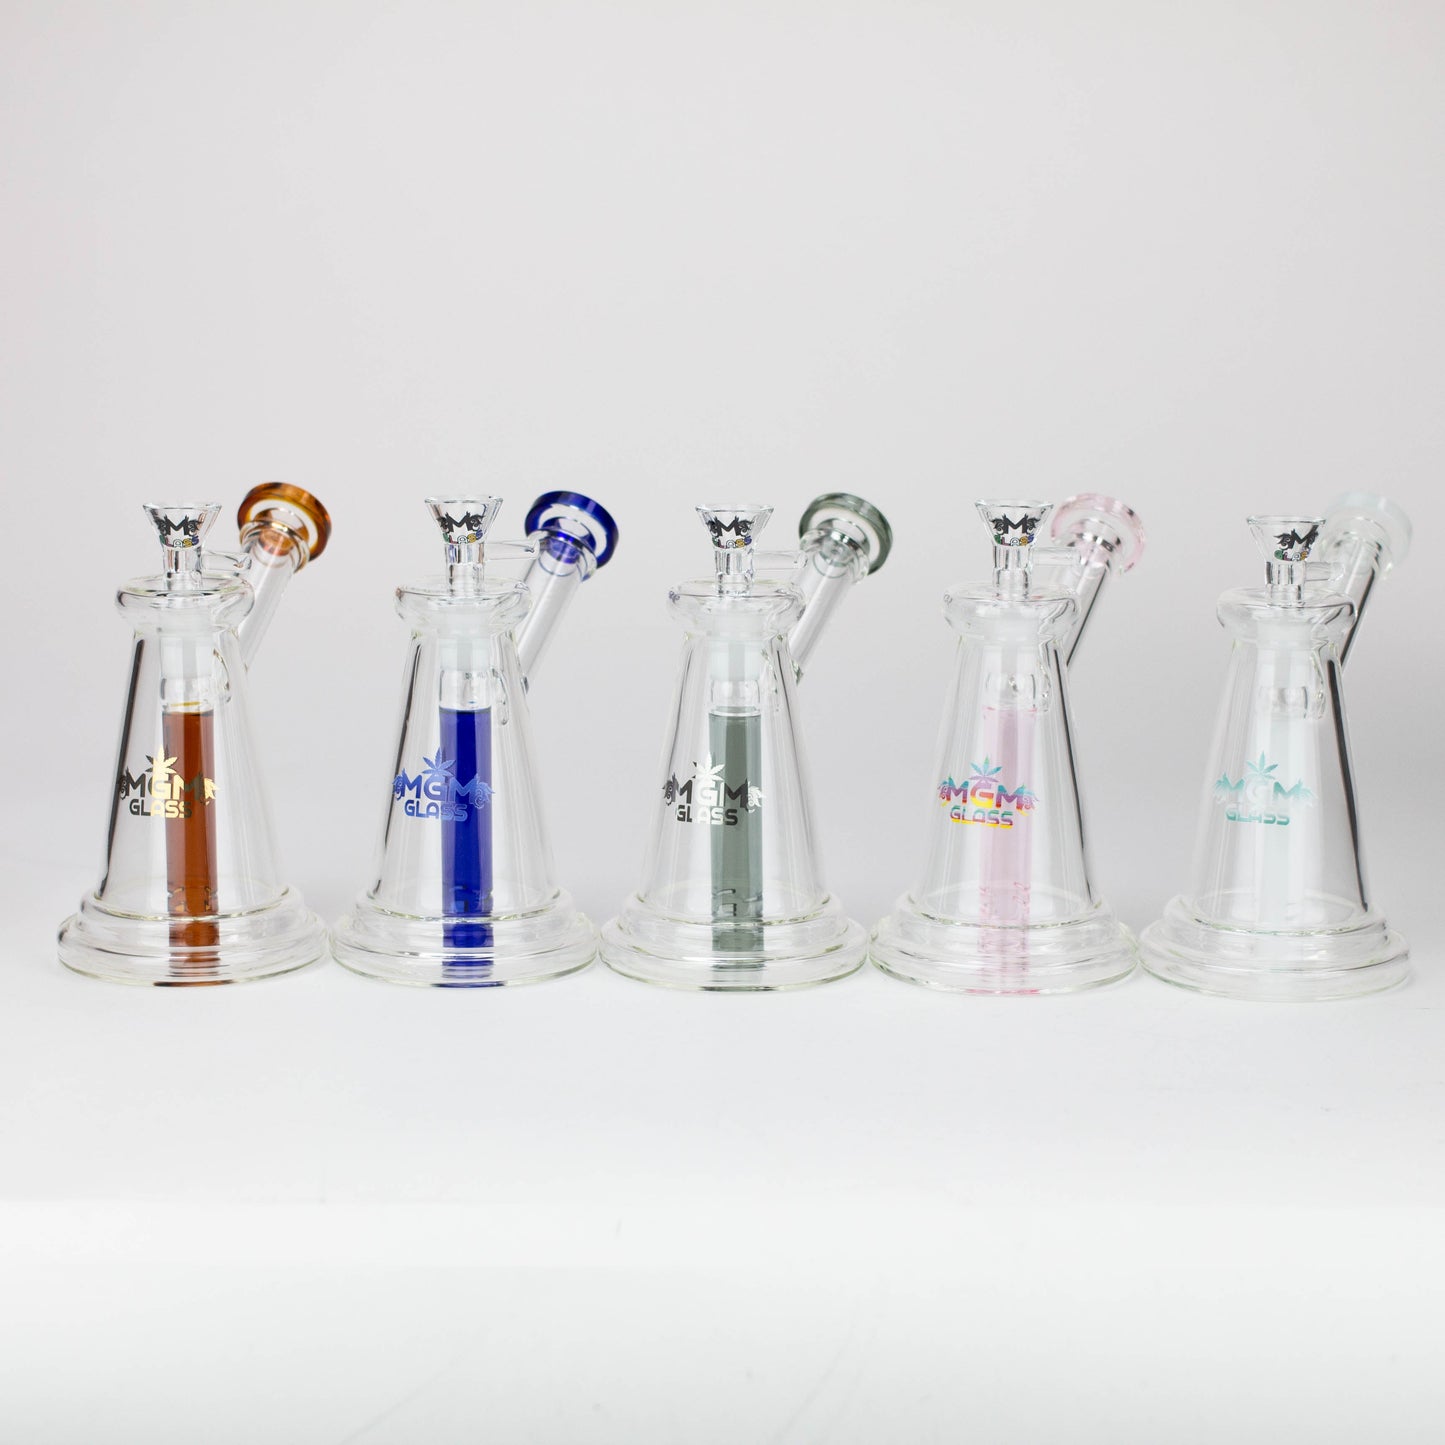 5.7" MGM Glass 2-in-1 bubbler with logo [C2676]_5